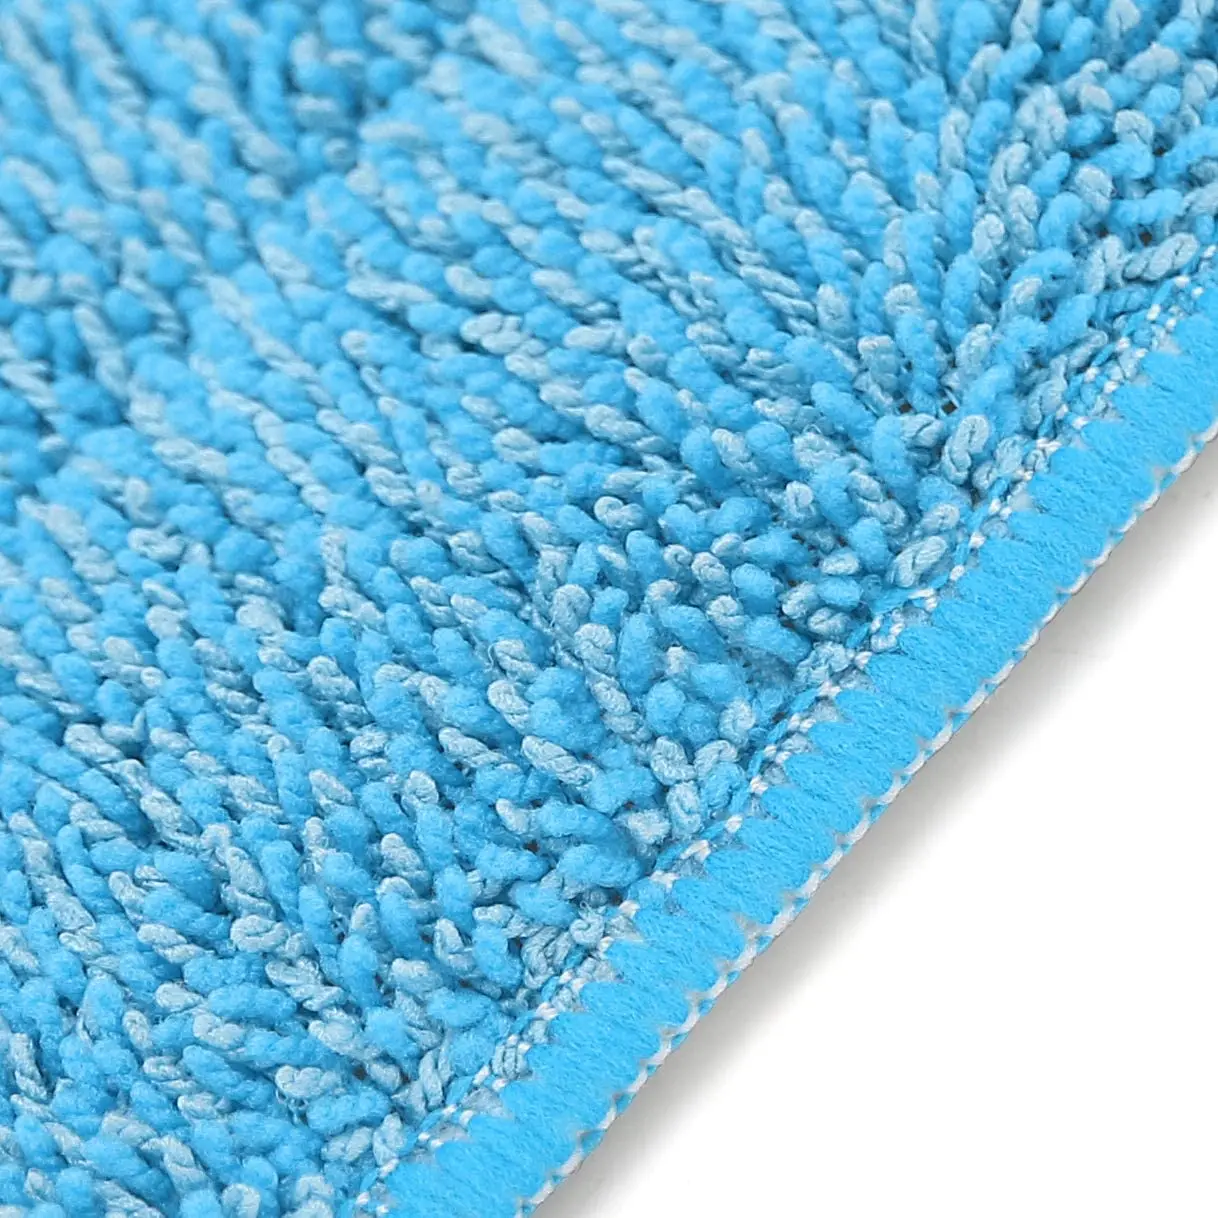 Microfiber pads spray mop refill Microfiber Spray Mop Replacement Heads for Wet/Dry Mops